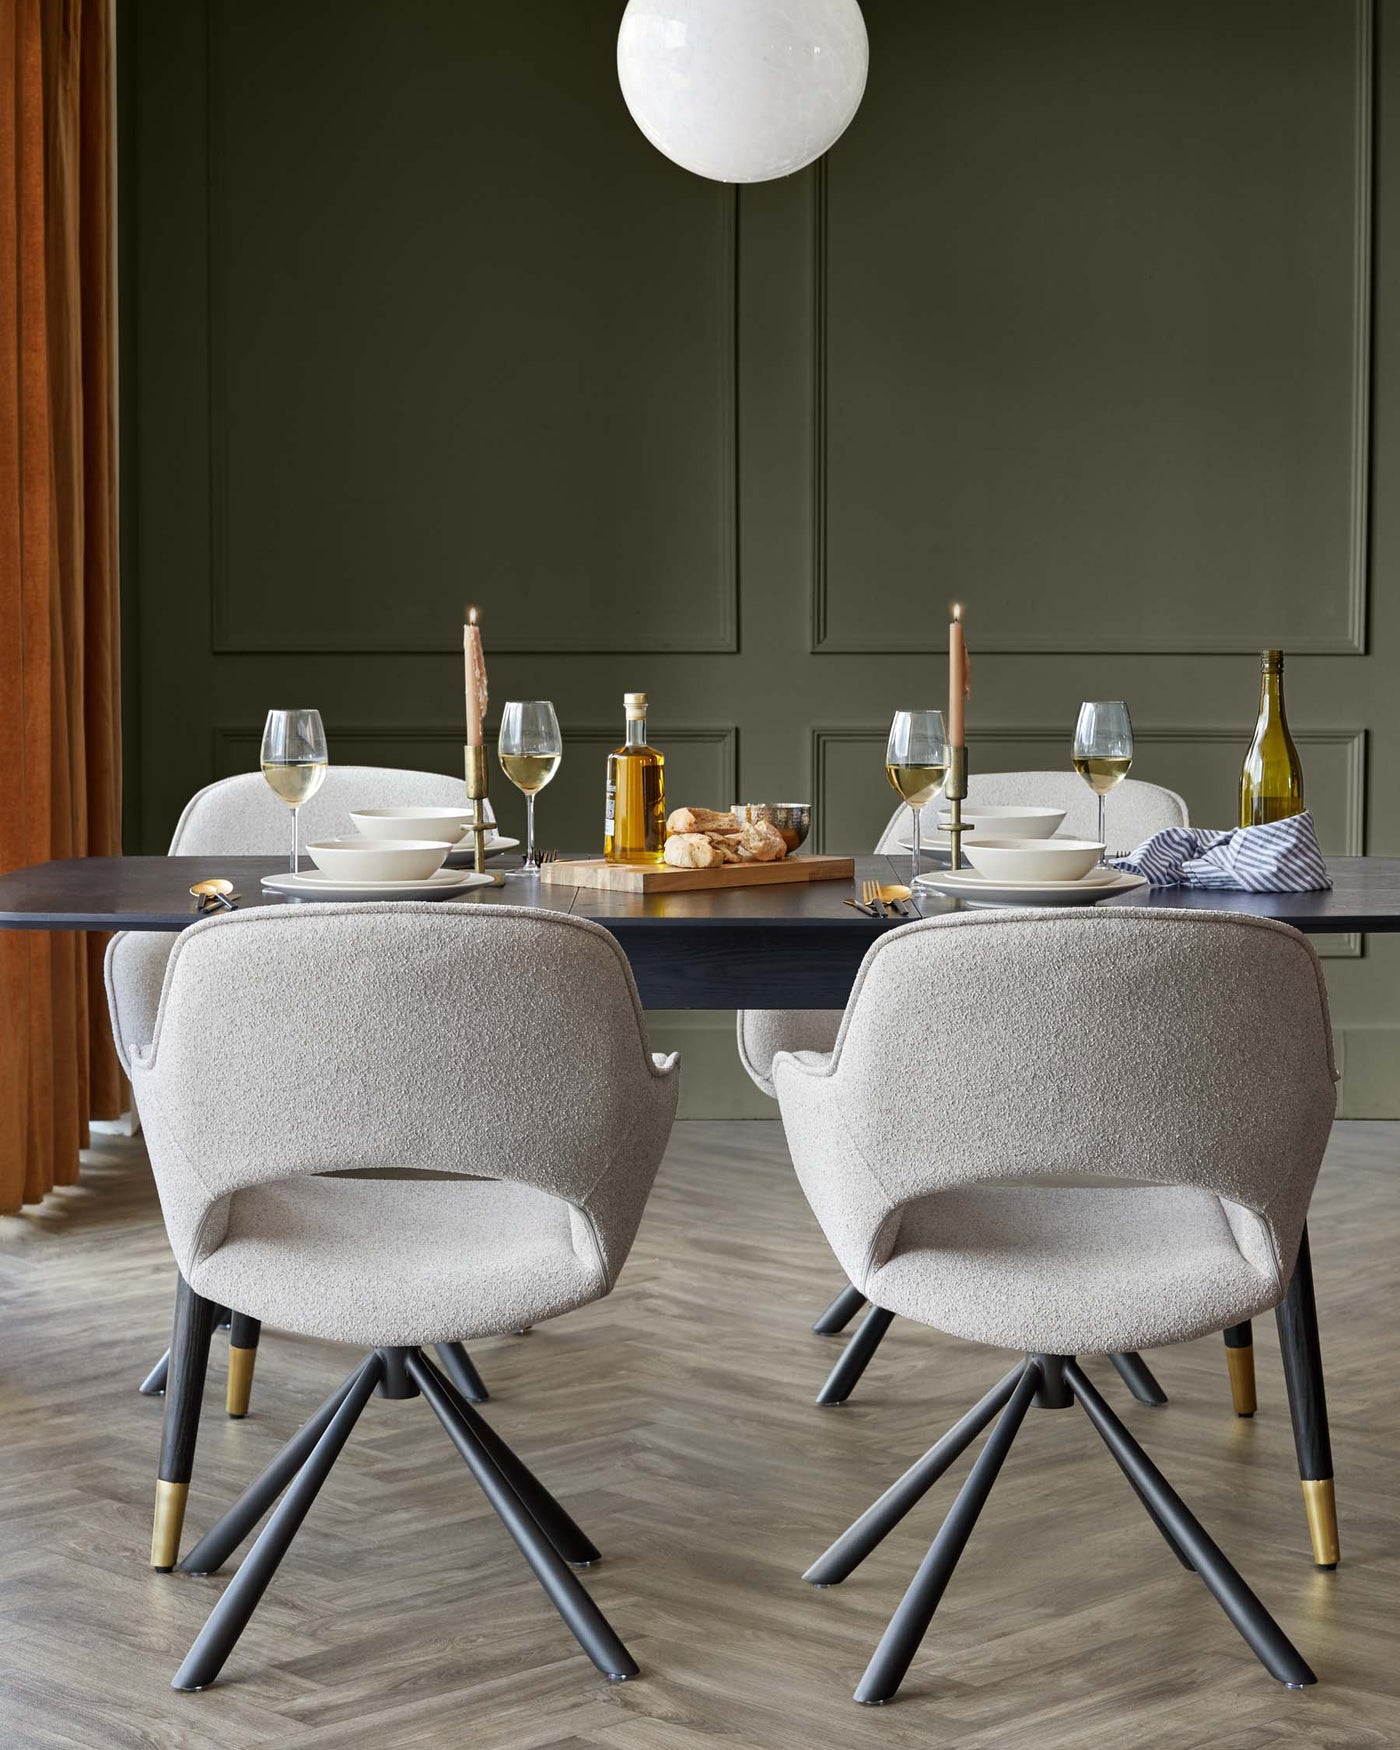 A modern dining set featuring a sleek, dark wood table coupled with four plush, textured fabric upholstered chairs with unique black legs tipped with brass accents. The chairs exhibit a cosy, yet stylish armchair design that enhances both comfort and visual appeal.